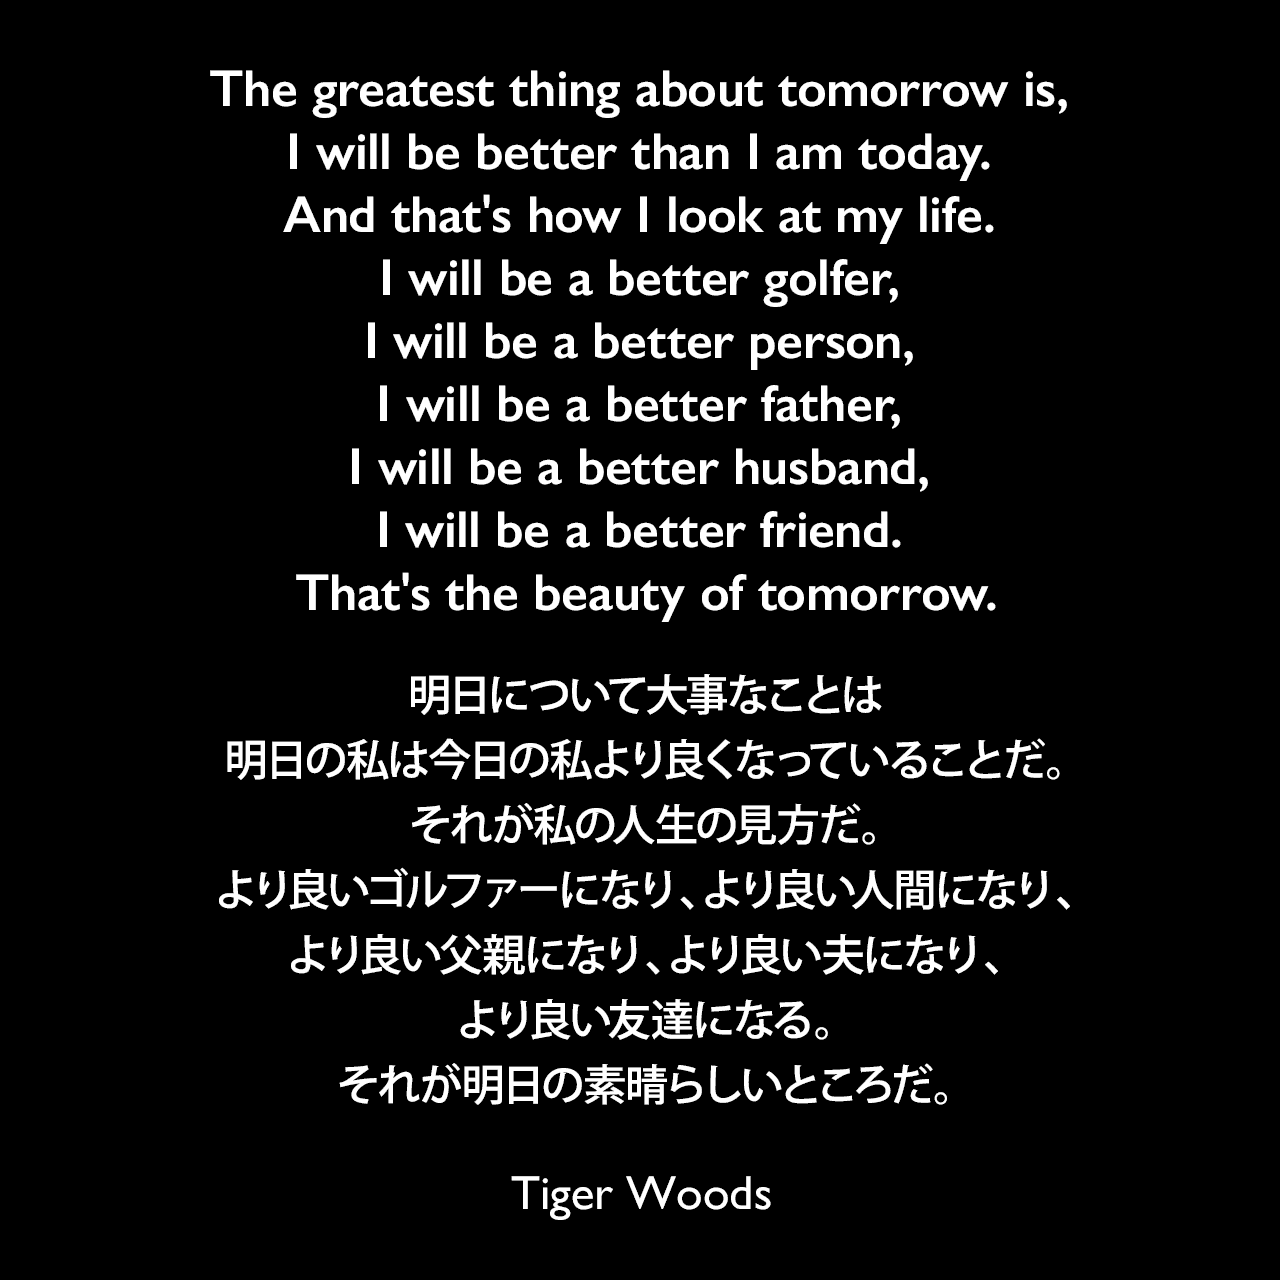 The greatest thing about tomorrow is, I will be better than I am today. And that's how I look at my life. I will be a better golfer, I will be a better person, I will be a better father, I will be a better husband, I will be a better friend. That's the beauty of tomorrow.明日について大事なことは、明日の私は今日の私より良くなっていることだ。それが私の人生の見方だ。より良いゴルファーになり、より良い人間になり、より良い父親になり、より良い夫になり、より良い友達になる。それが明日の素晴らしいところだ。Tiger Woods